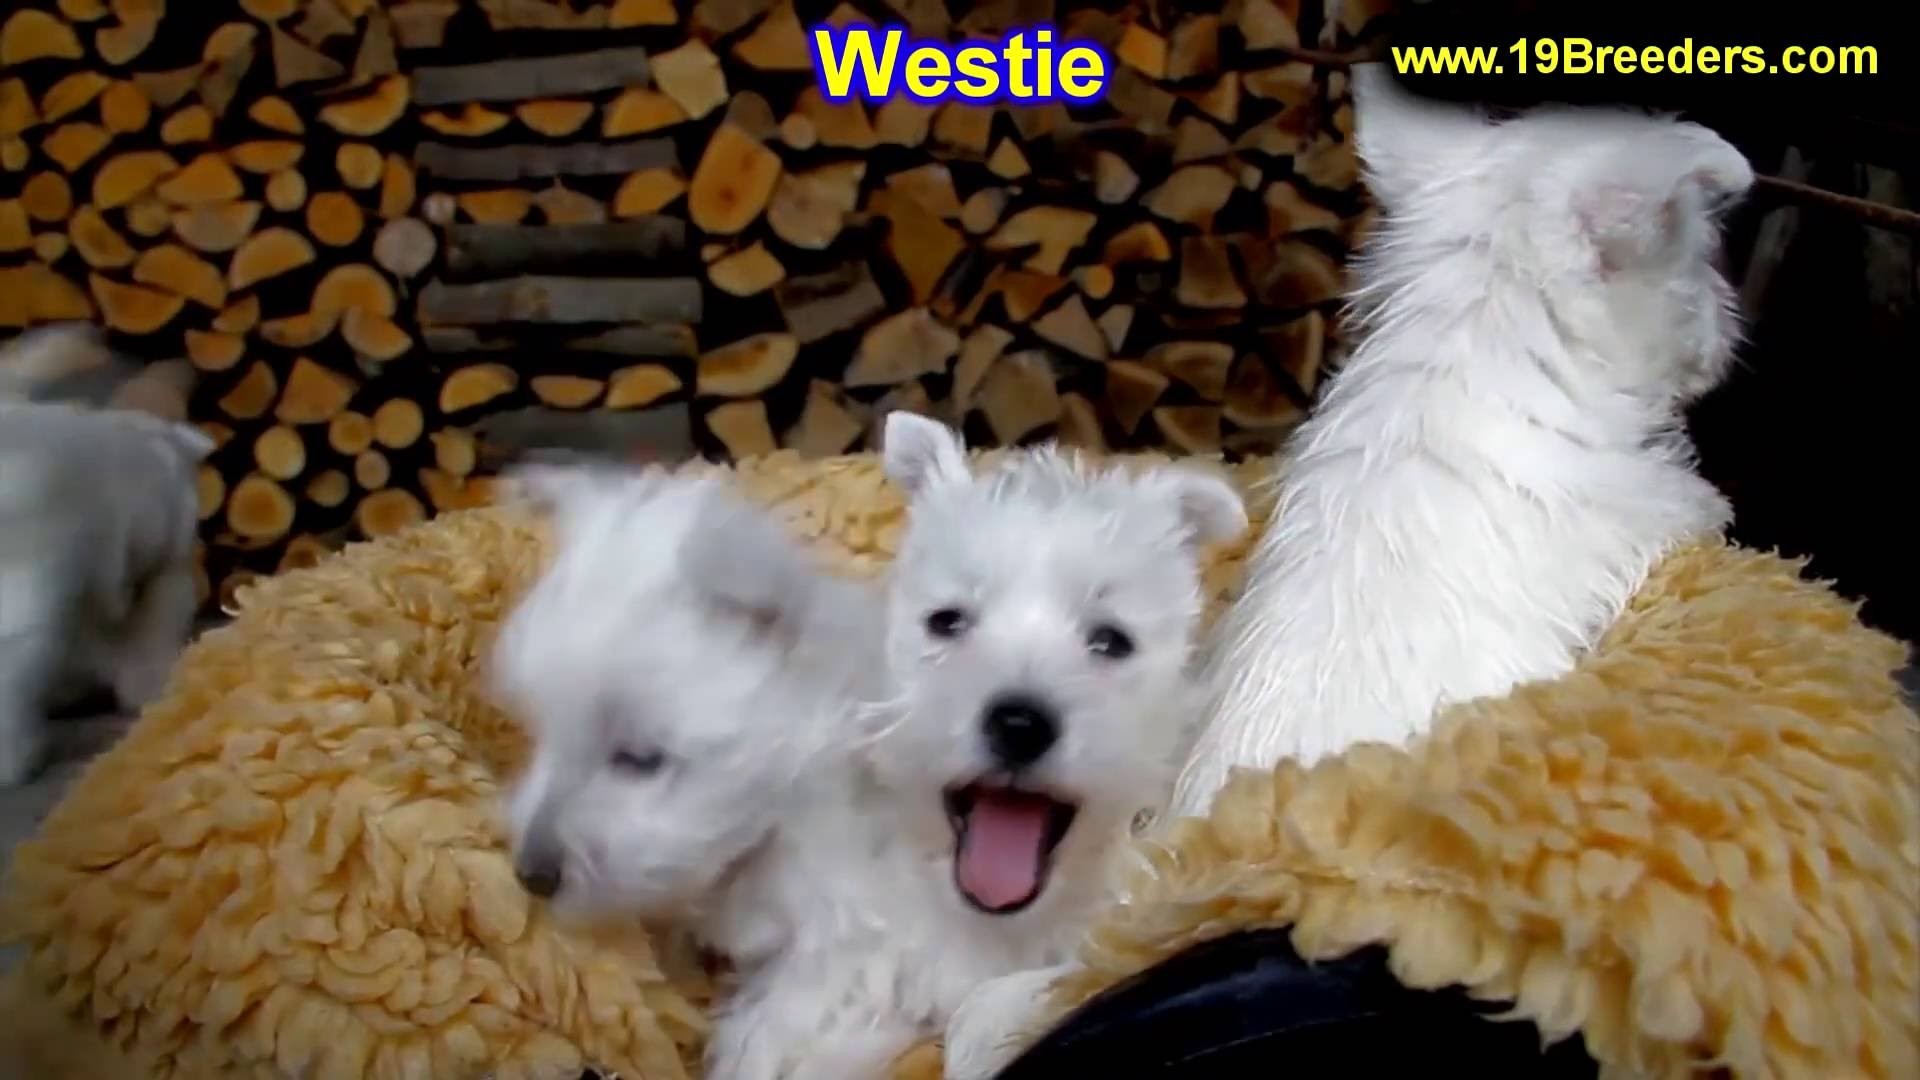 1920x1080 West Highland White Terrier, Westie, Puppies, Dogs, For Sale, In Charlotte,  North Carolina, NC, Cary